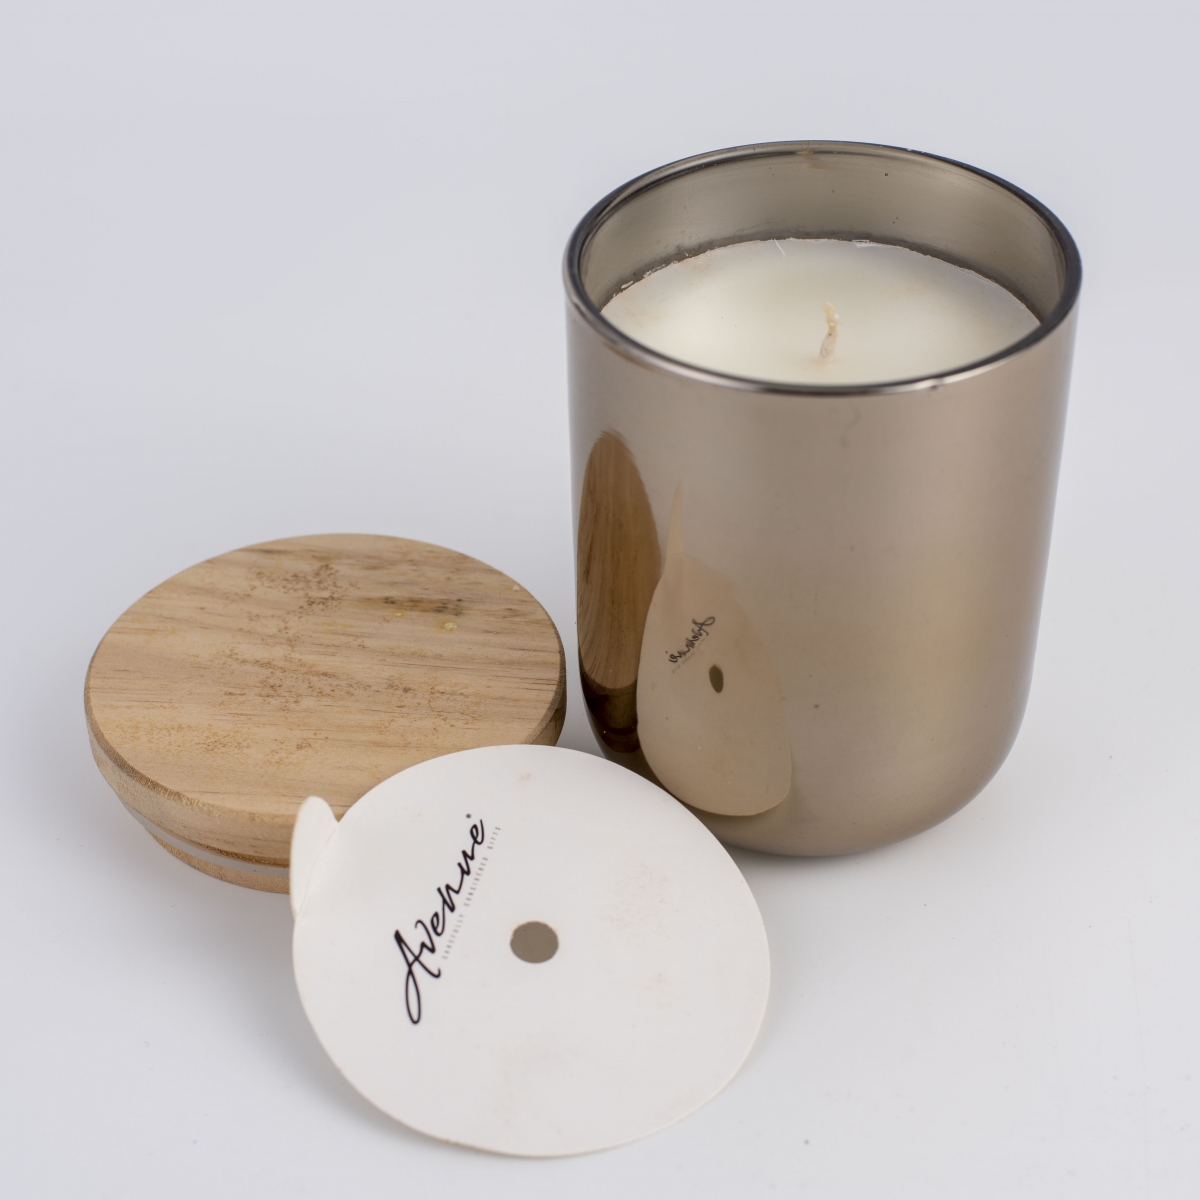 Vegan Candles : Soy Wax ,Copper Glass Jar ,Wood Lid ,China Factory ,Good Price ,Clearance-HOWCANDLE-Candles,Scented Candles,Aromatherapy Candles,Soy Candles,Vegan Candles,Jar Candles,Pillar Candles,Candle Gift Sets,Essential Oils,Reed Diffuser,Candle Holder,